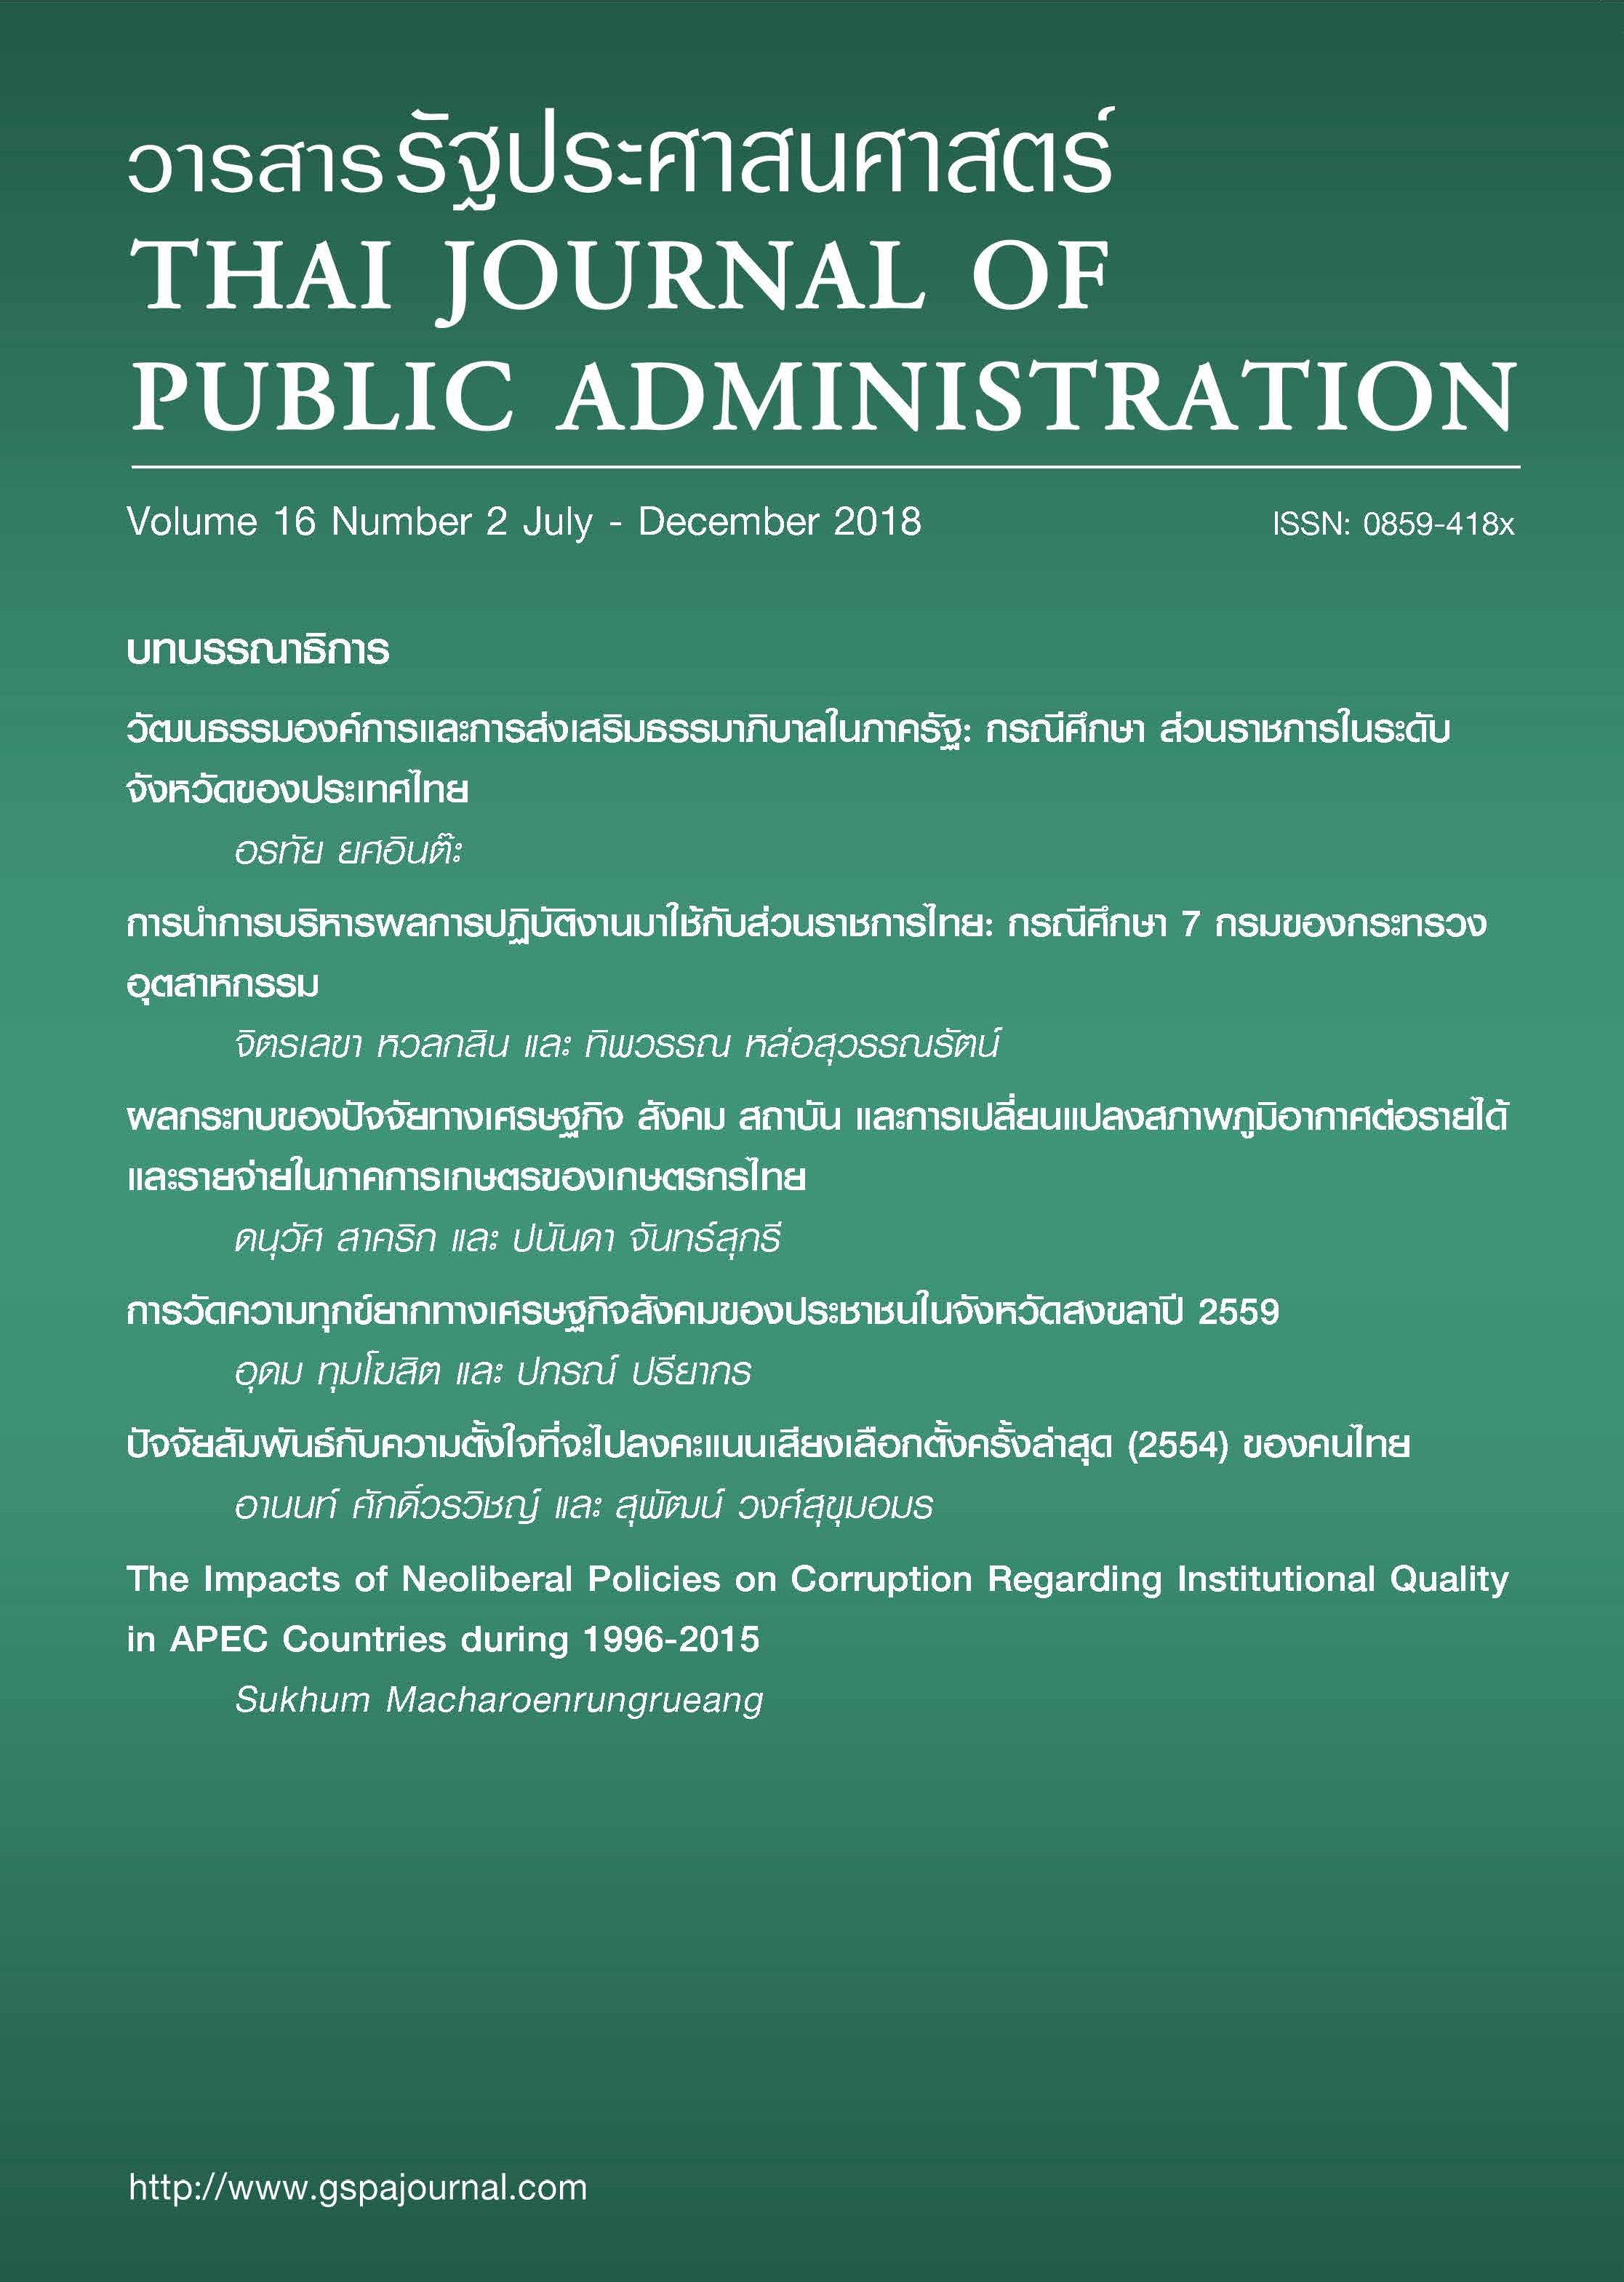 					View Vol. 16 No. 2 (2018): Thai Journal of Public Administration Volume 16 Number 2
				